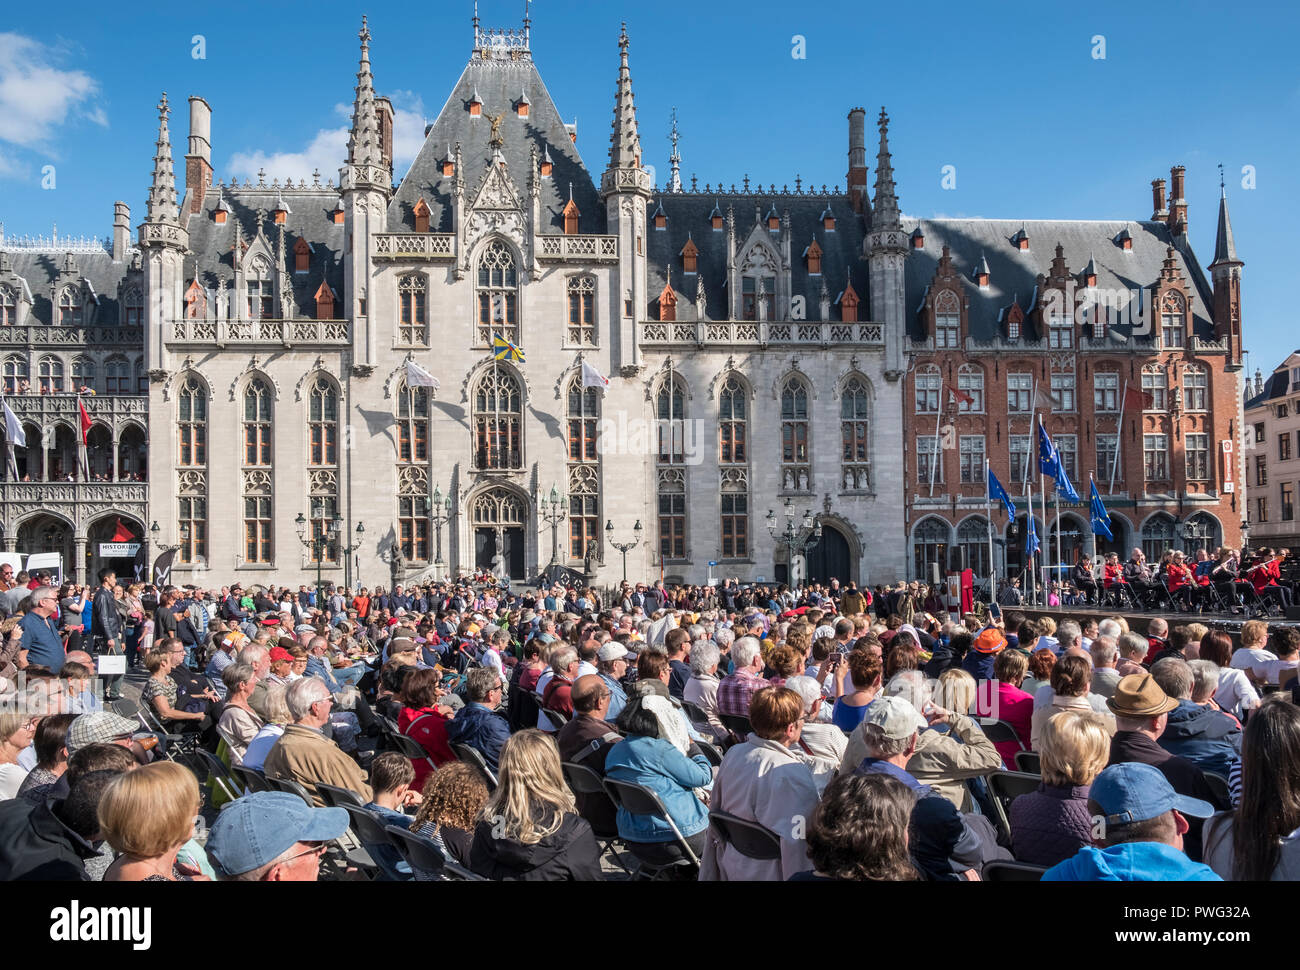 An audience enjoying an open air music concert during a sunny September day in the market square, Markt, Bruges, Flanders, Belgium. Stock Photo